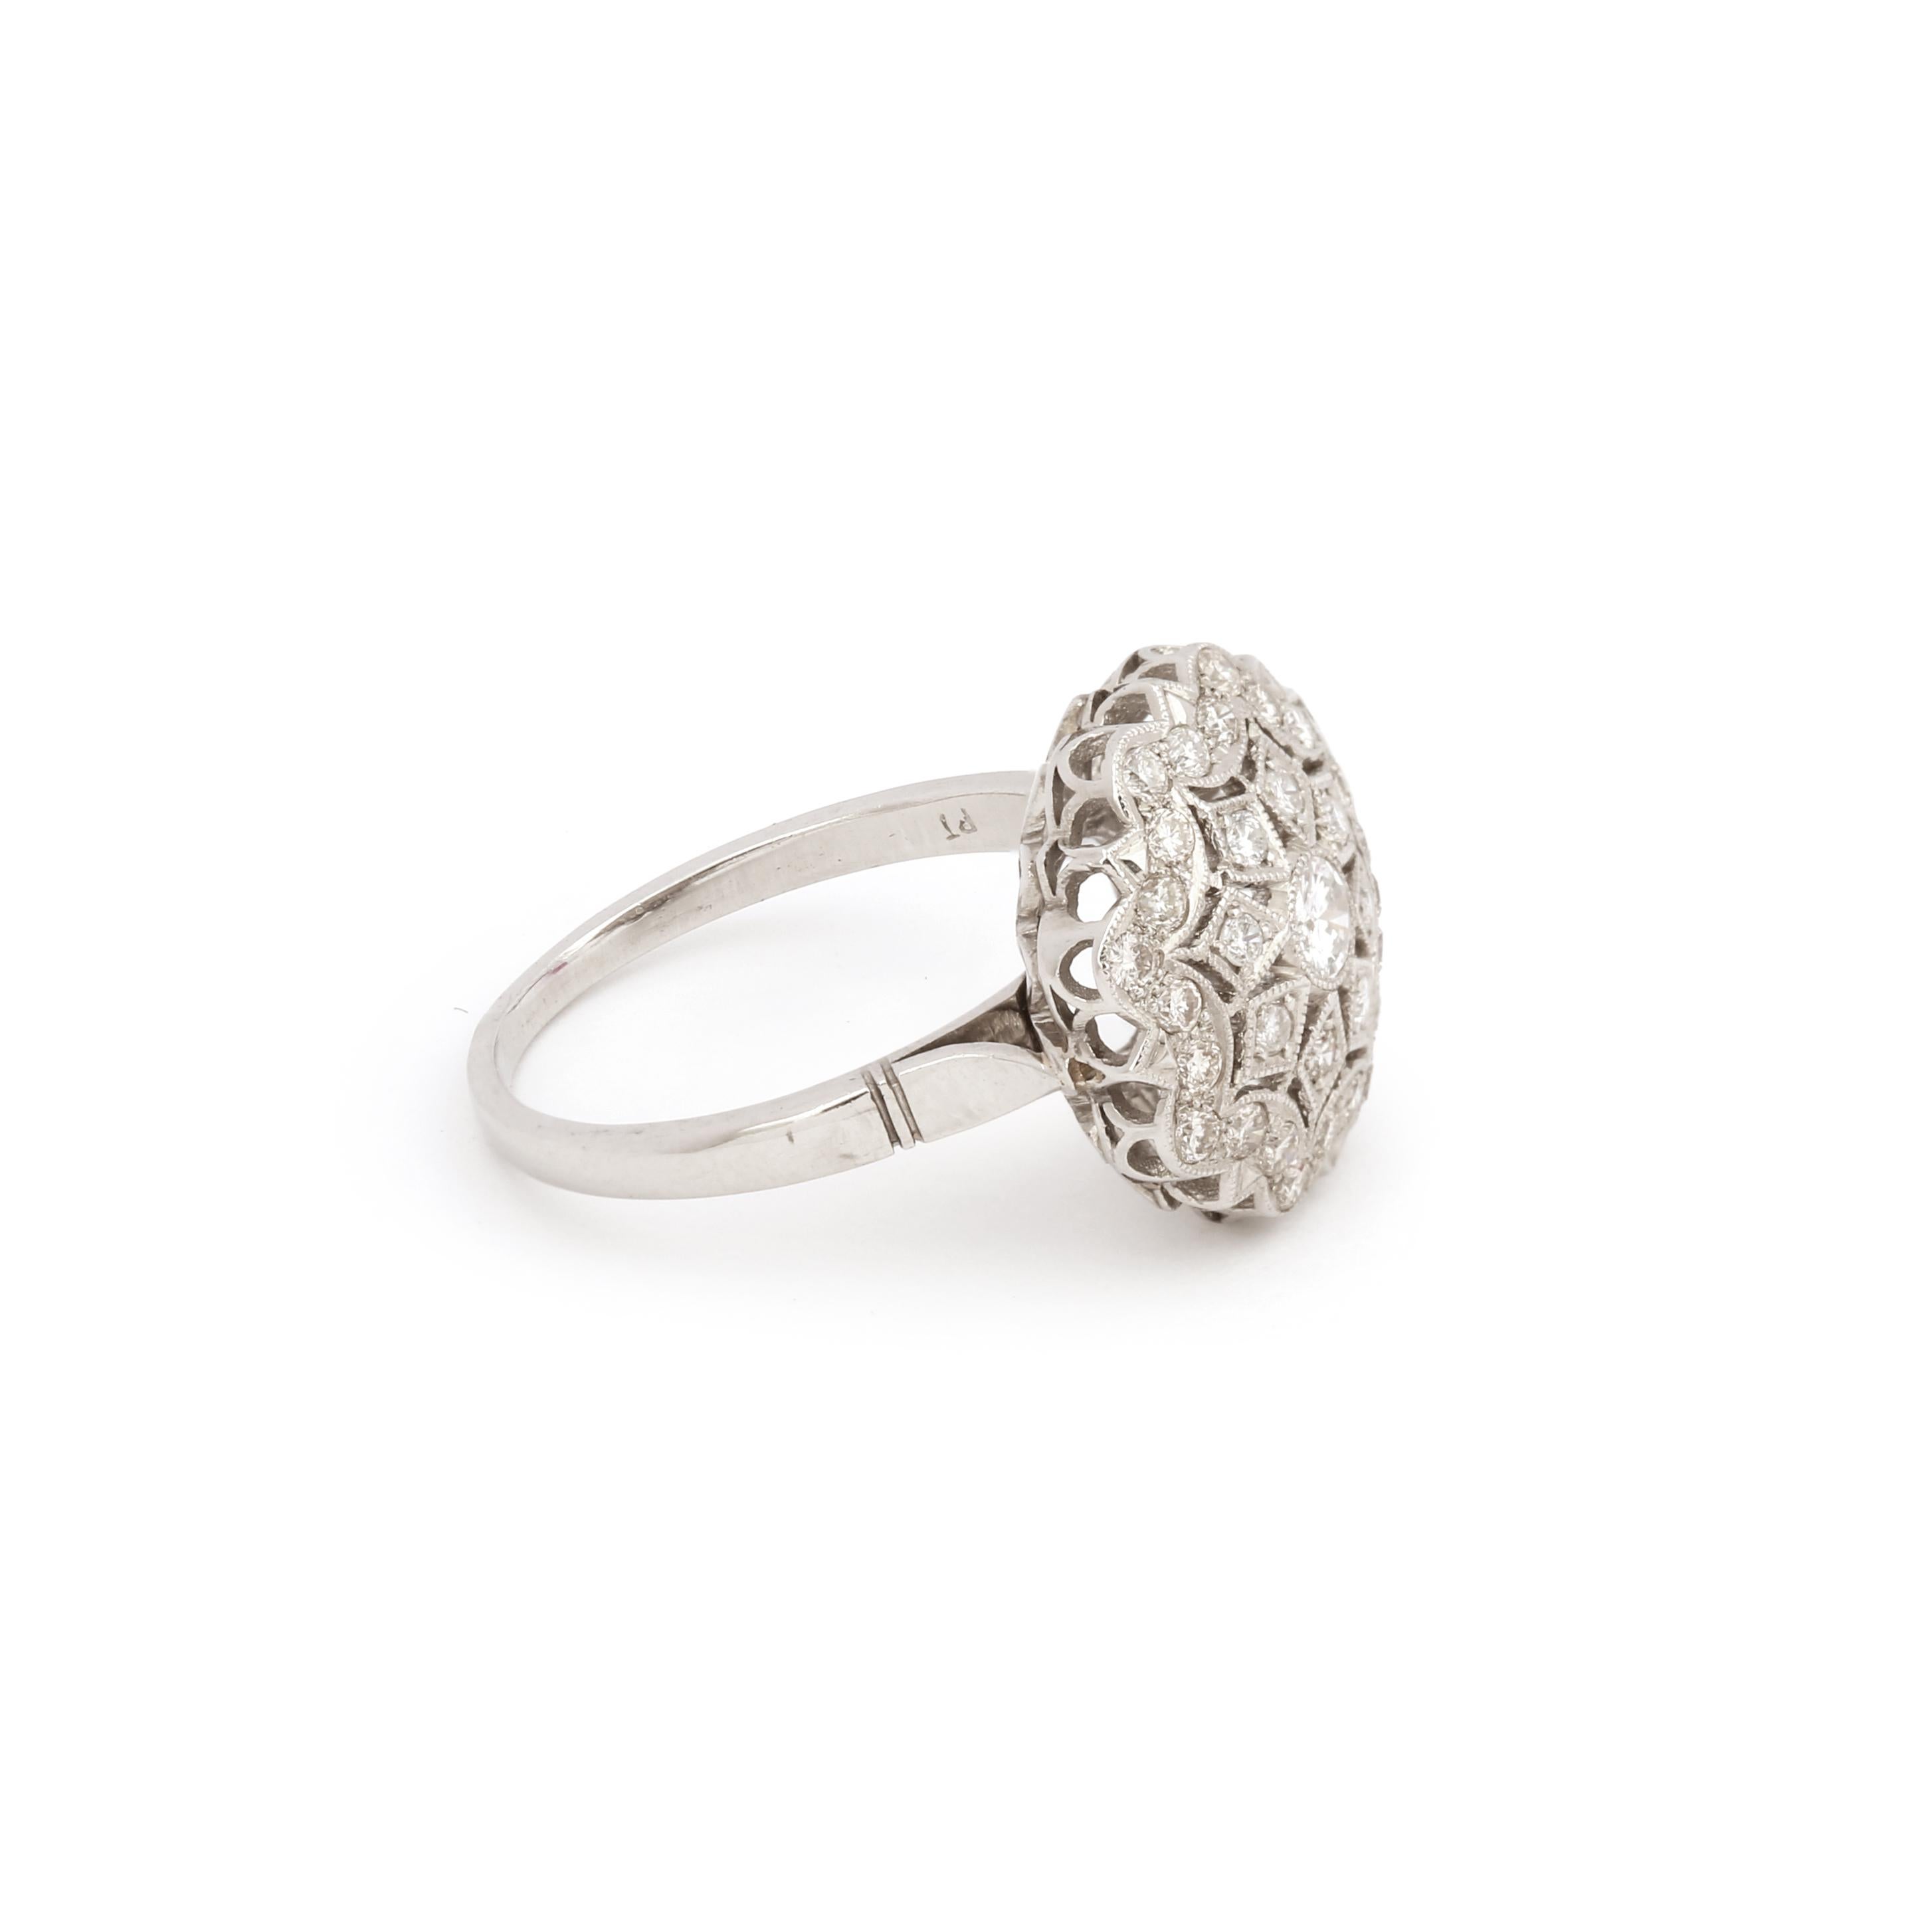 Platinum ring featuring a snowflake motif paved with brilliant-cut diamonds.

Estimated total weight of diamonds: 0.40 carats

Dimensions : 14.76 x 14.81 x 7.08 mm (0.581 x 0.583 x 0.279 inch)

Finger size : 52 (US : 6)

Ring weight : 4.8 g

French